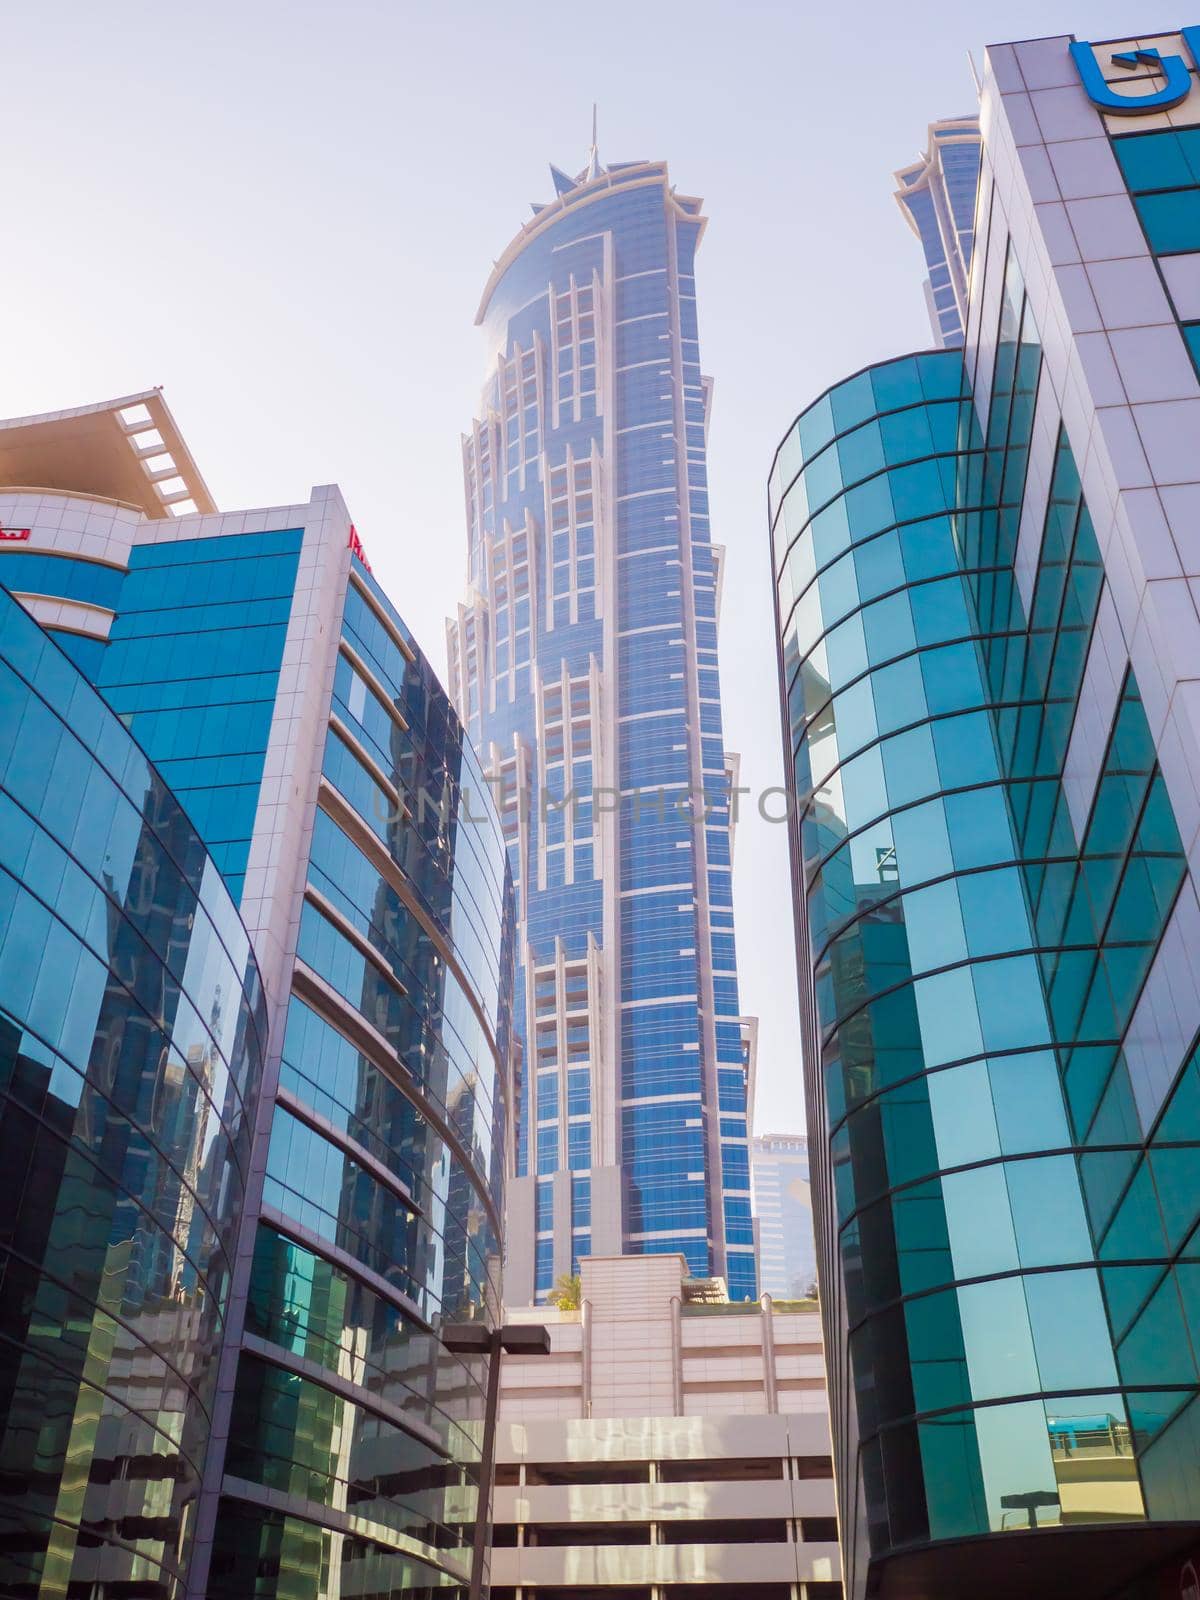 Dubai, UAE - May 15, 2018: Streets with modern skyscrapers of the city of Dubai by DovidPro